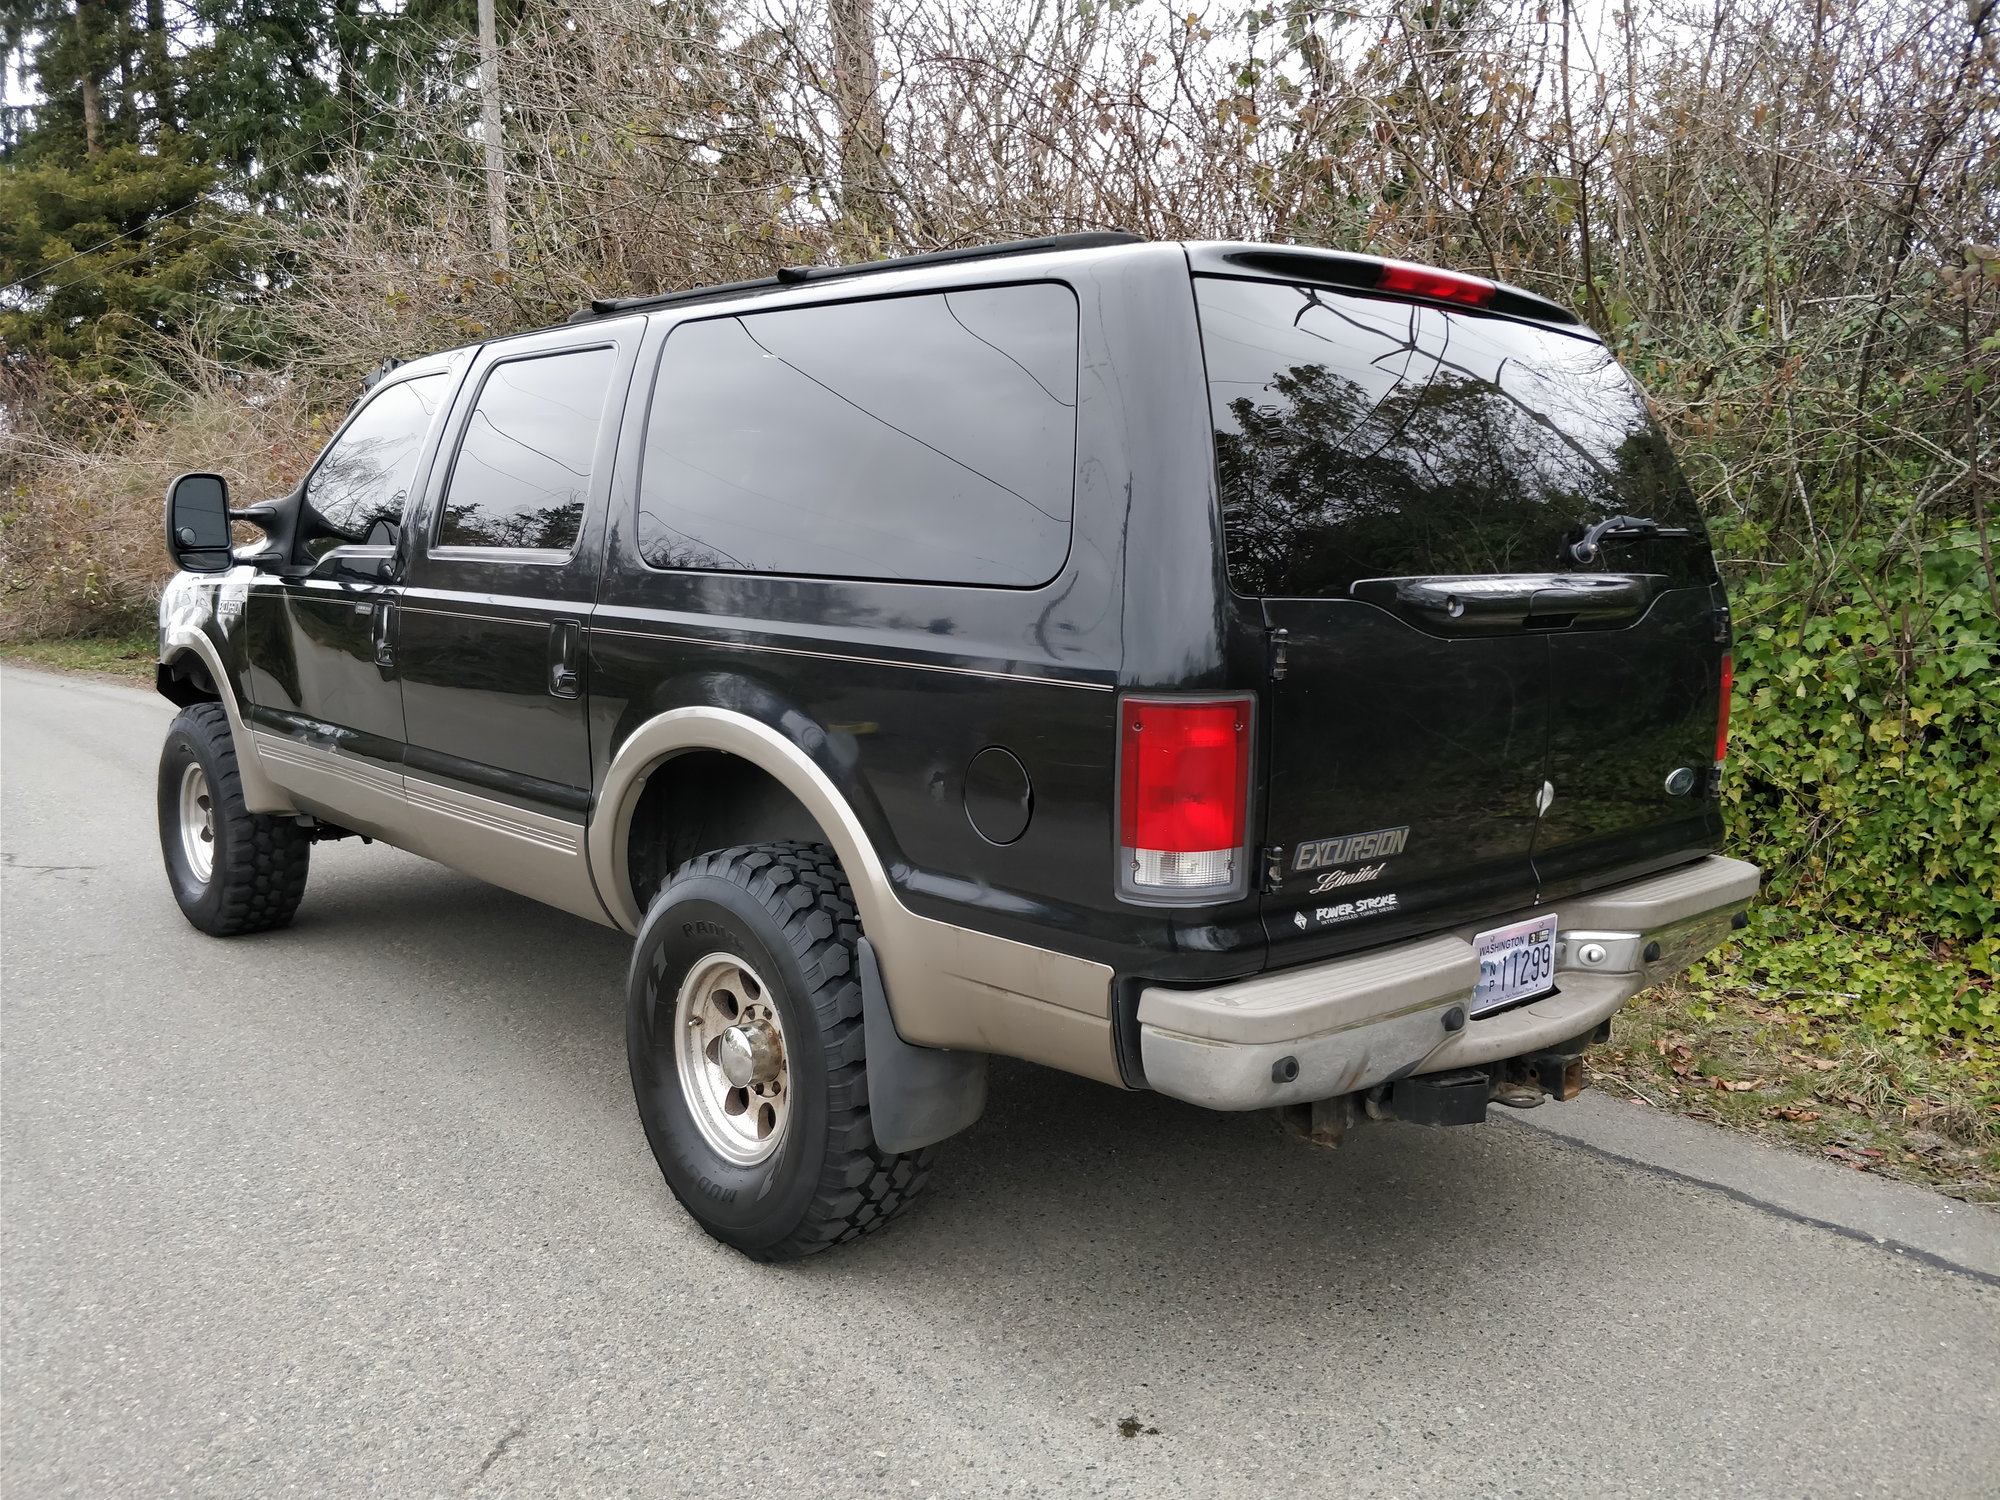 2000 Ford Excursion - 2000 Ford Excursion Limited 7.3PSD (diesel) lifted 4x4 with lots of mods for sale (Seattle, WA) - Used - VIN 1FMSU43FXYEC76734 - 272,236 Miles - 8 cyl - 4WD - Automatic - SUV - Black - Seattle, WA 98178, United States